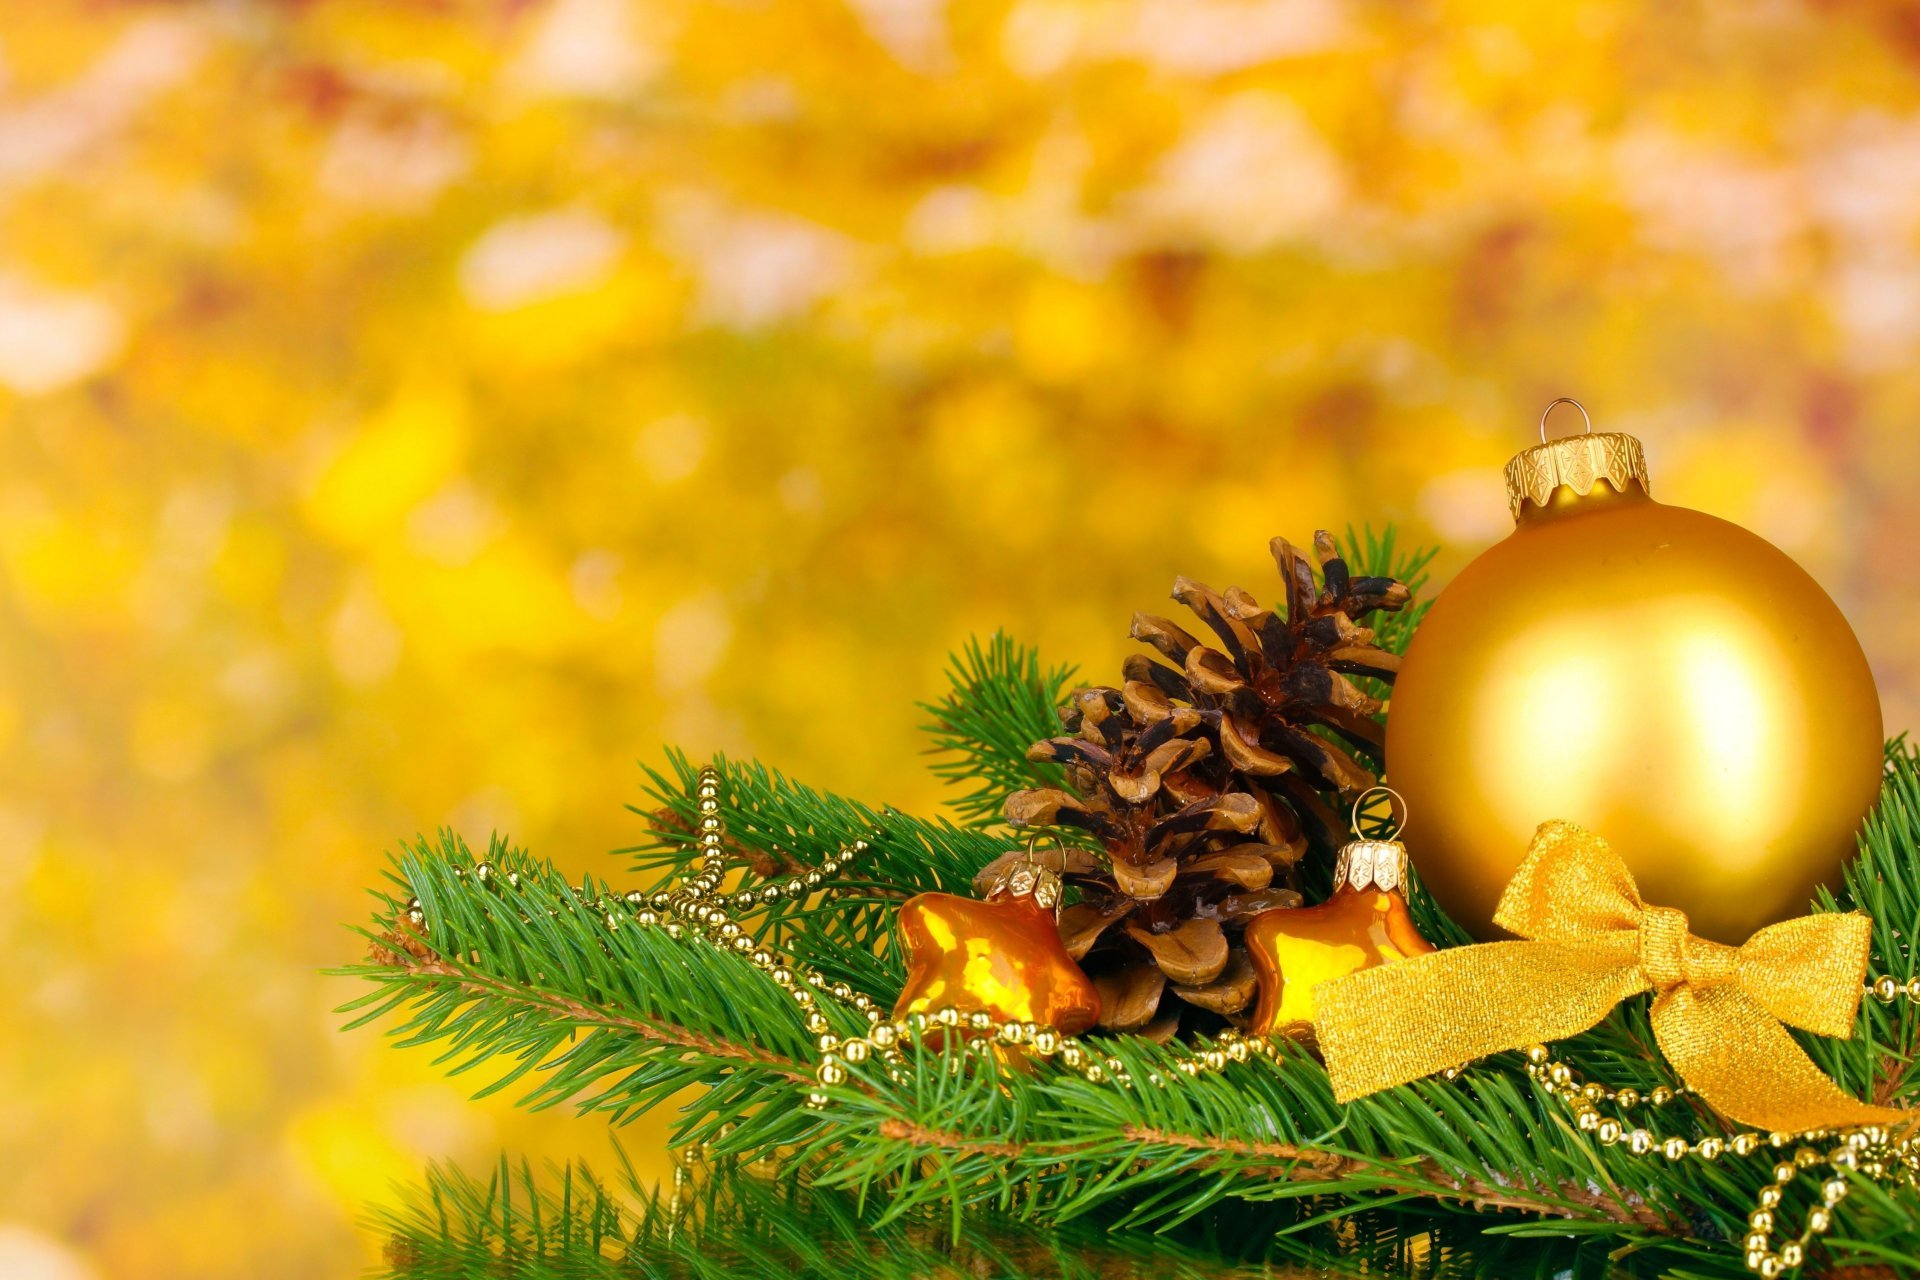 Yellow Christmas Balls Wallpapers High Quality Download - พื้น หลัง การ์ด ปี ใหม่ , HD Wallpaper & Backgrounds